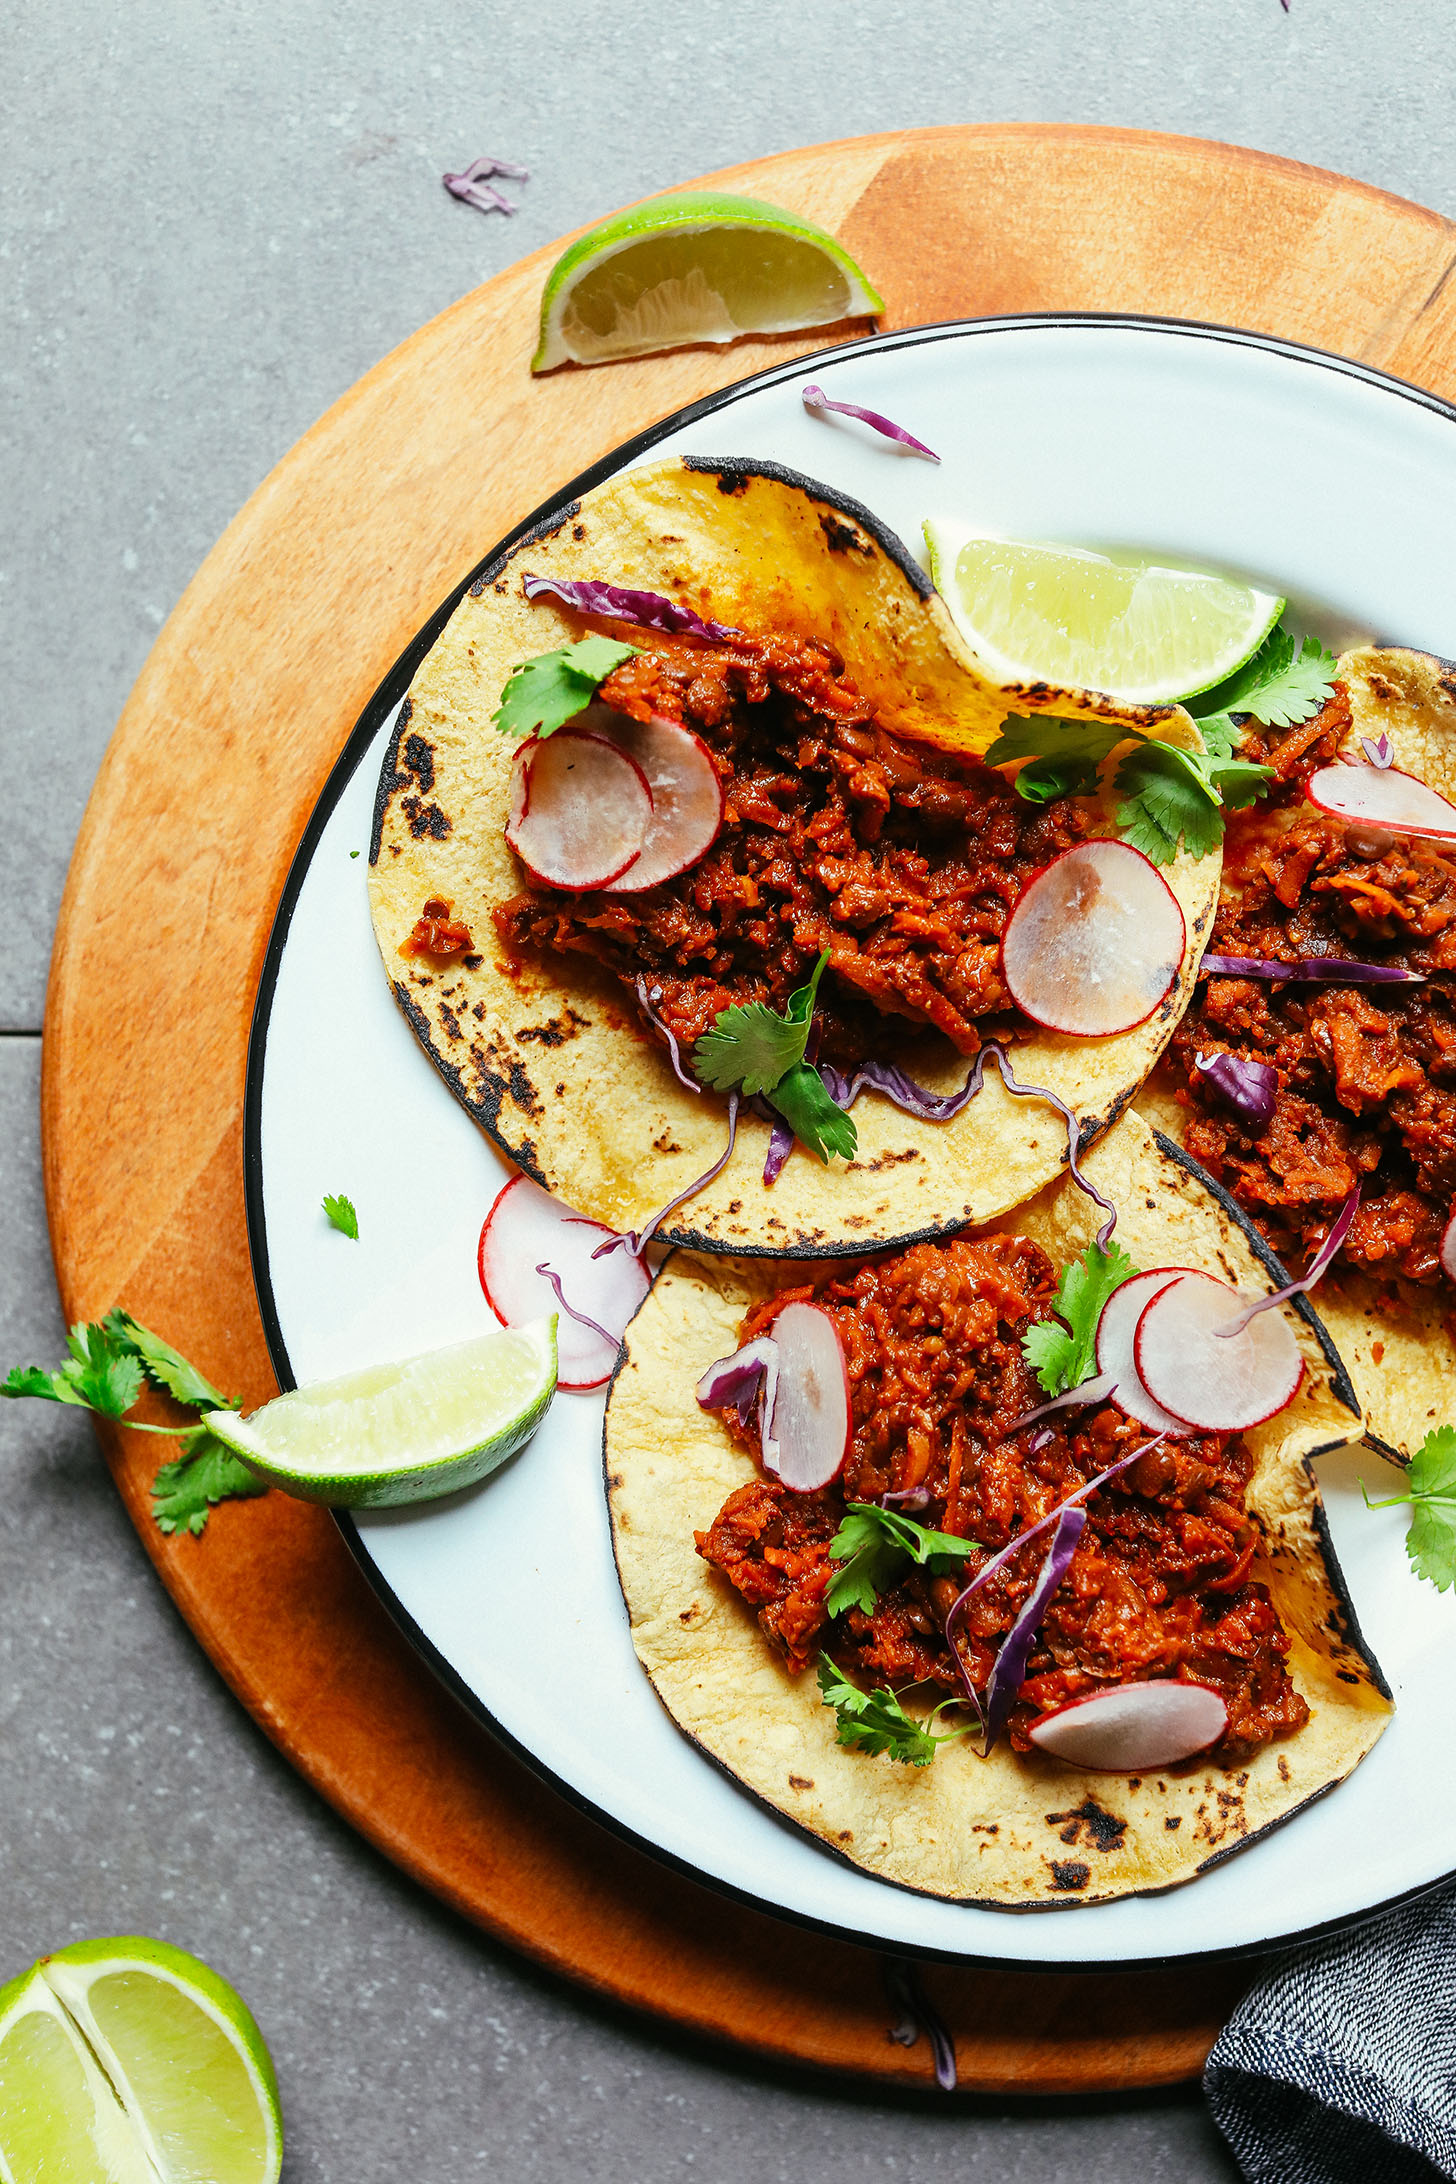 Plate of healthy plant-based tacos made with our Vegan Barbacoa recipe